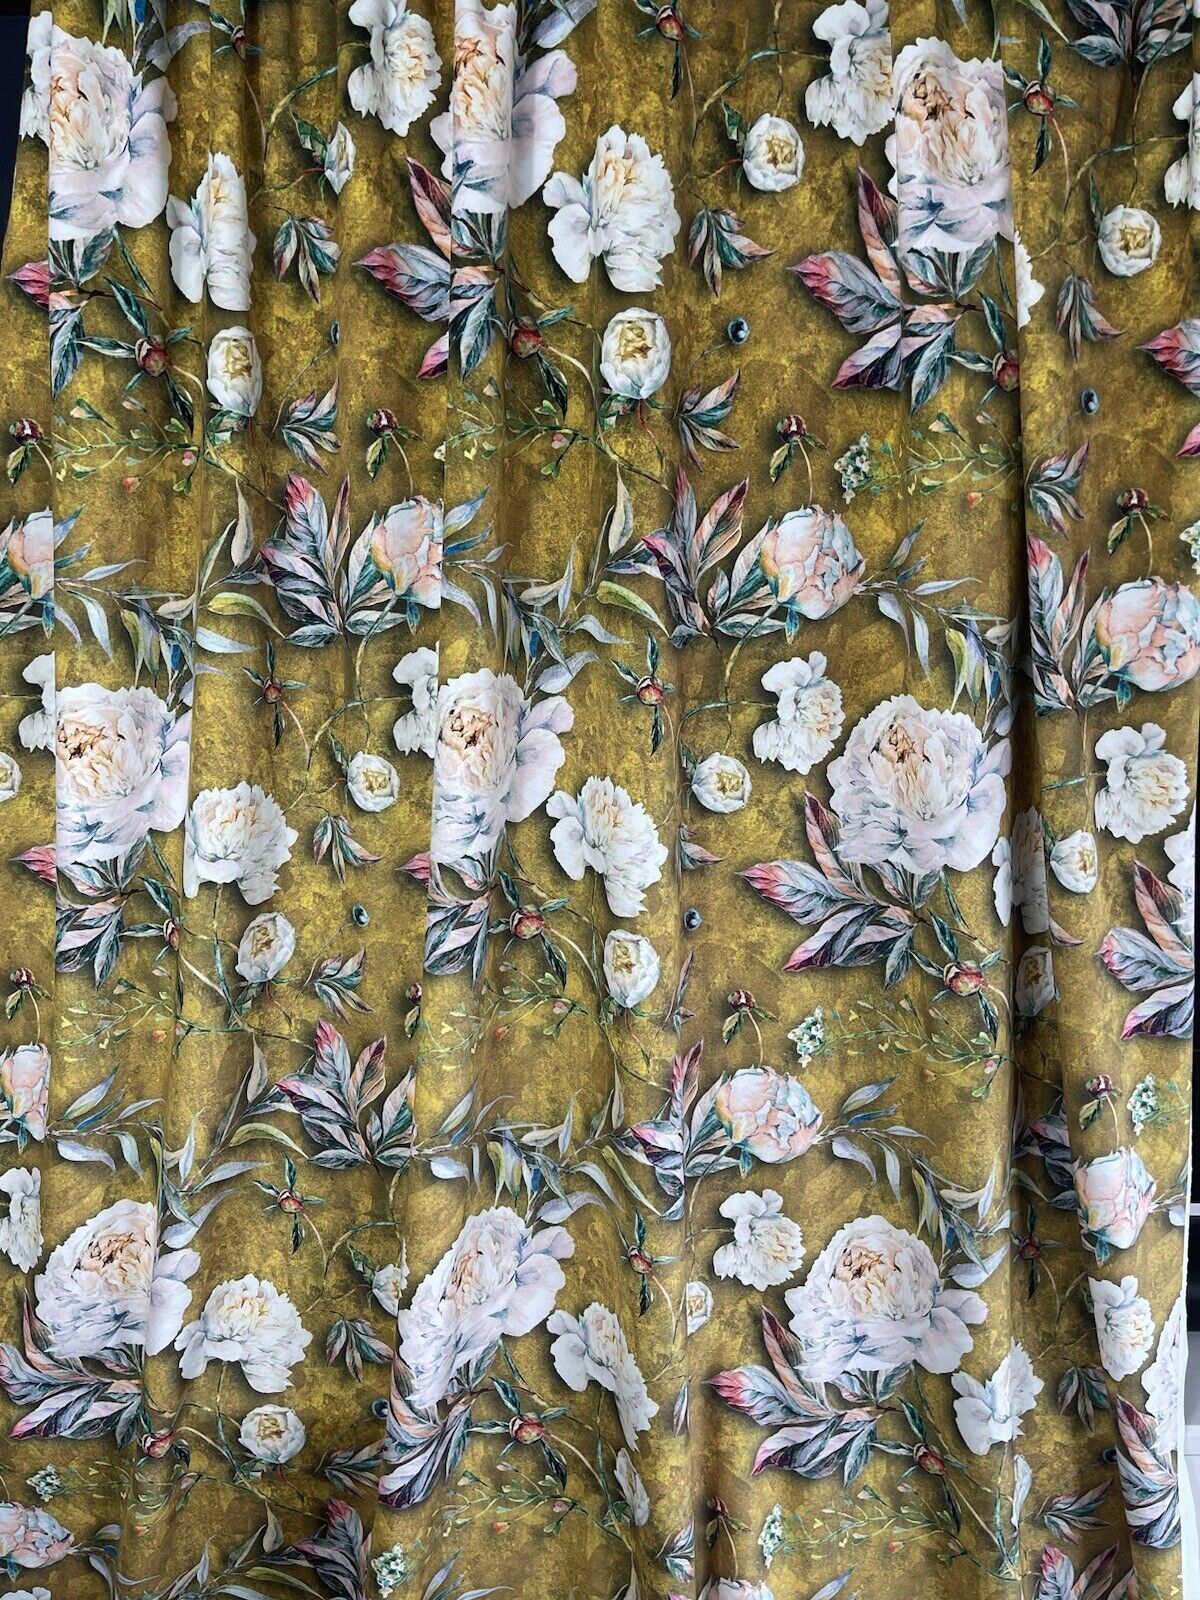 Light Pink Roses in Bloom Printed on Yellow Gold Color Velvet  Fabric Sold by Yard Meter DIY Upholstery Floral Sewing Material By Yards Metros Flowers Curtain Textile